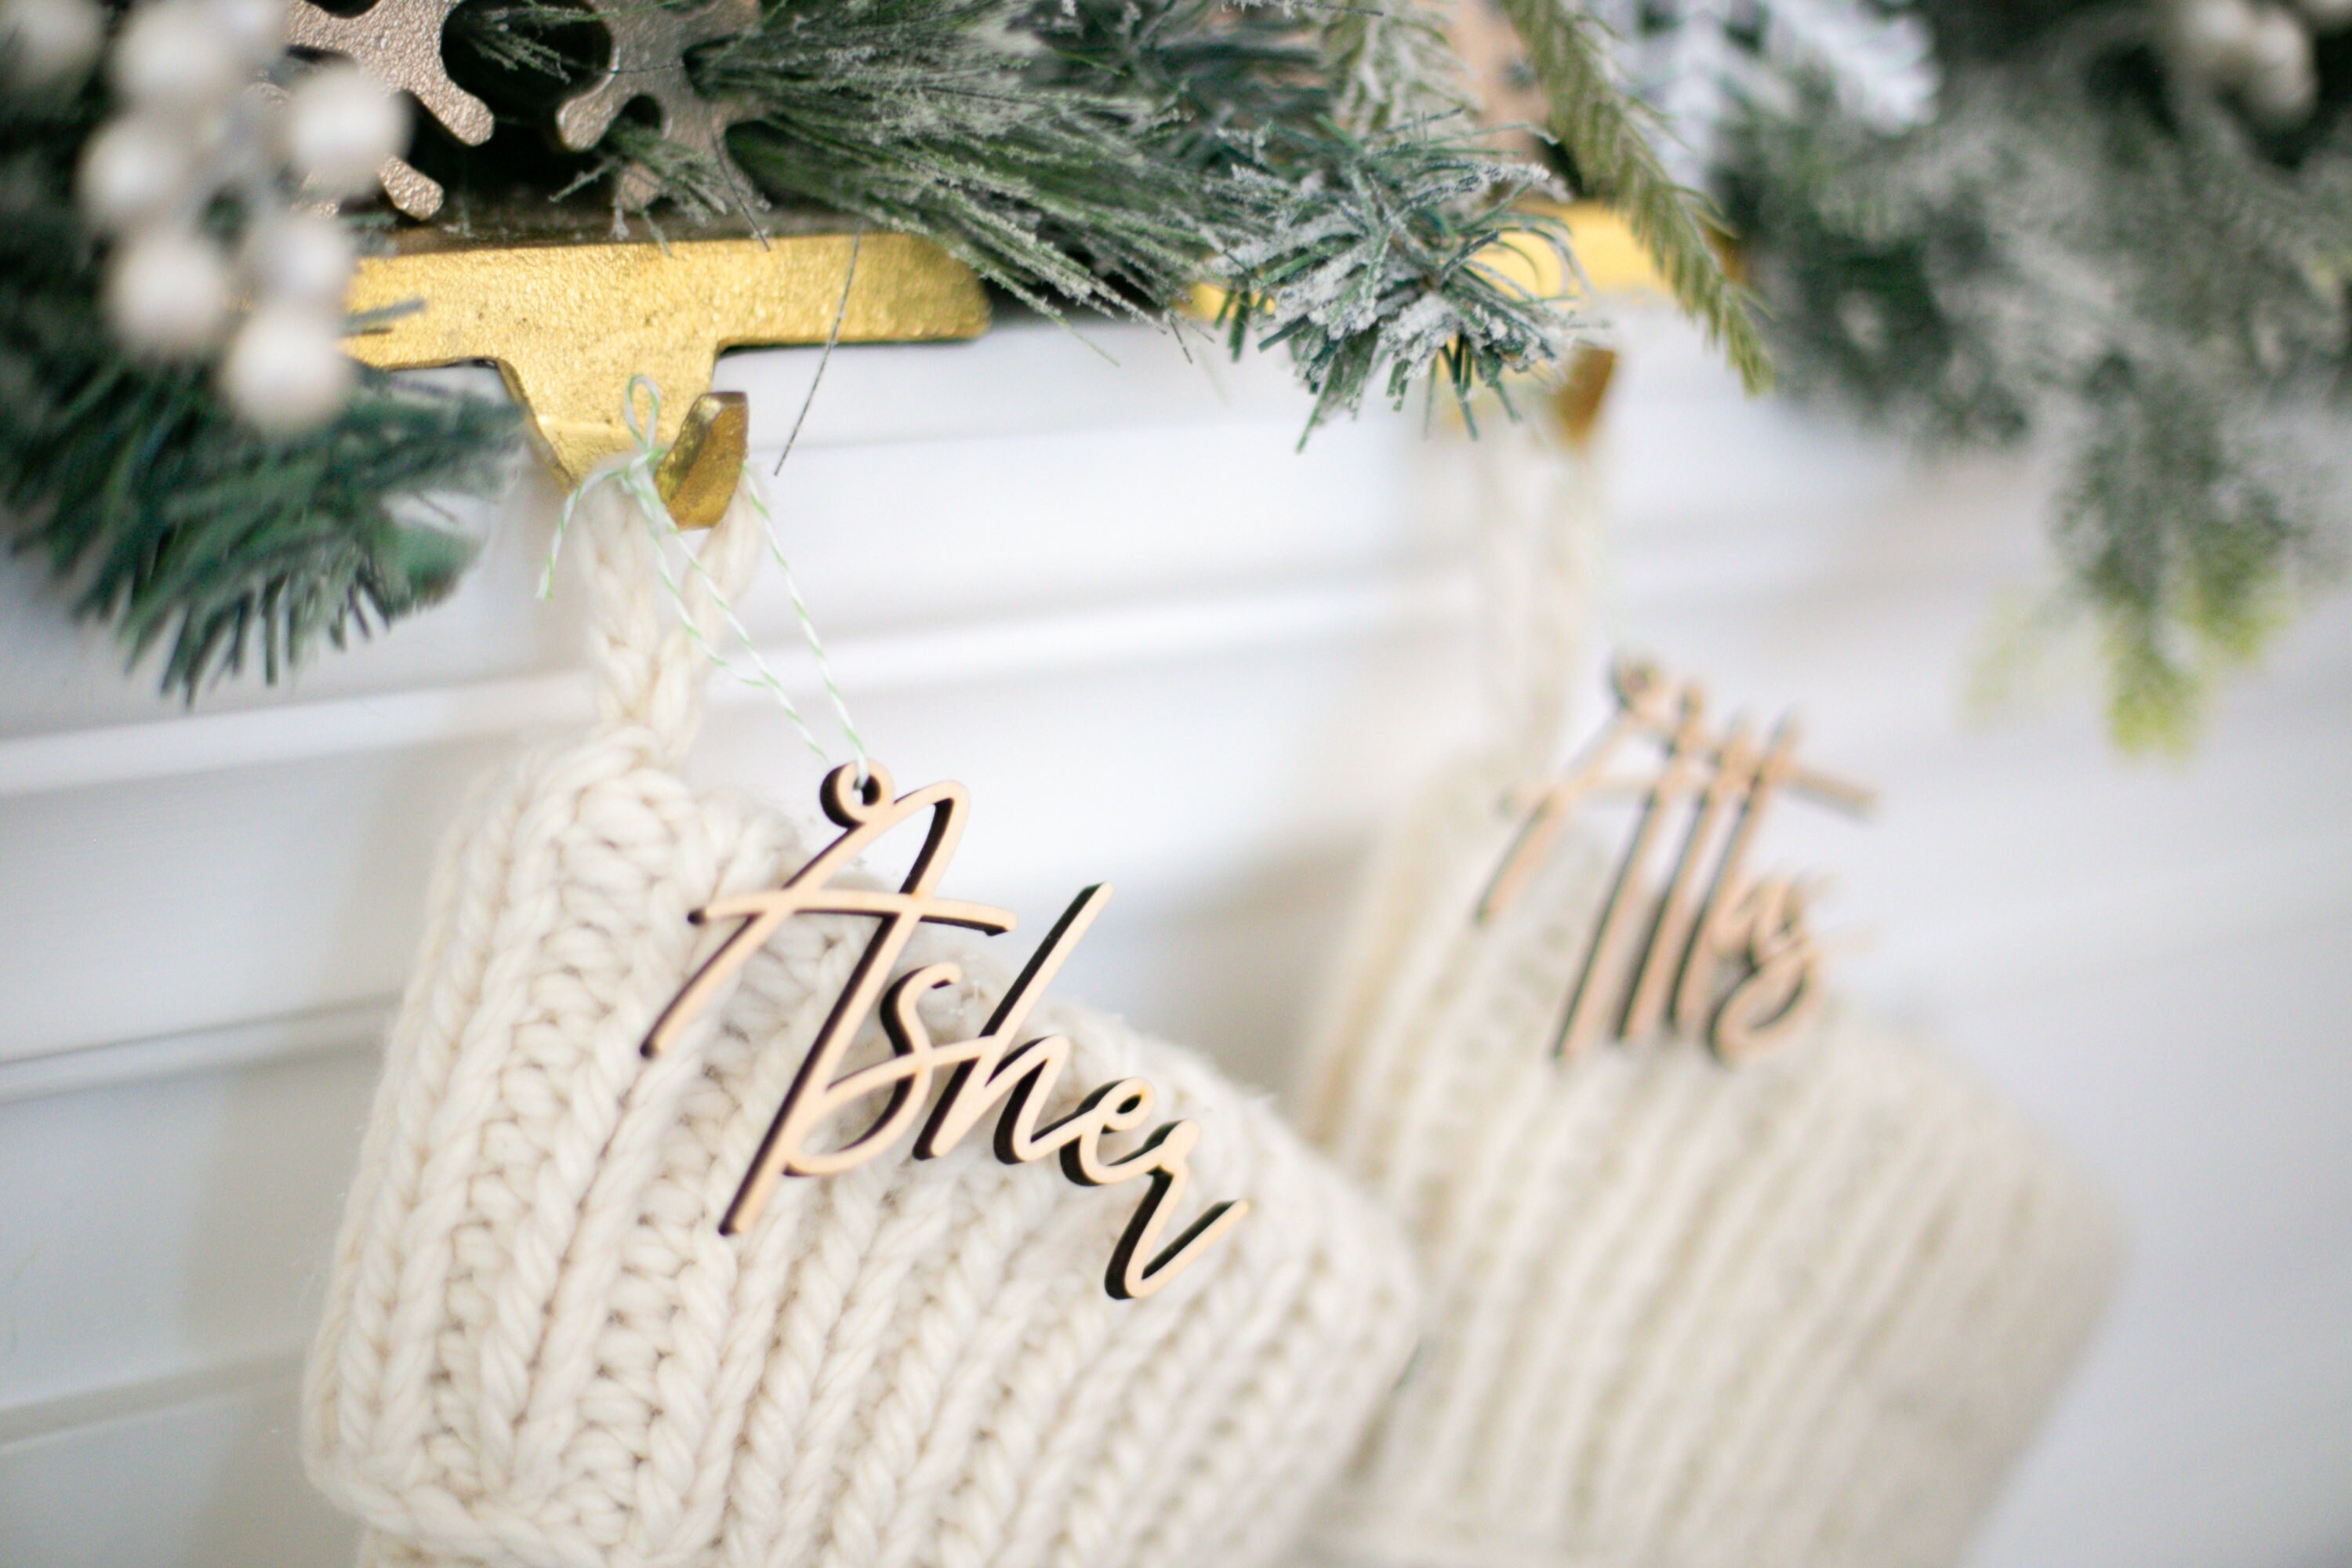 Christmas Stockings Name Tags Wooden Names for Stocking 